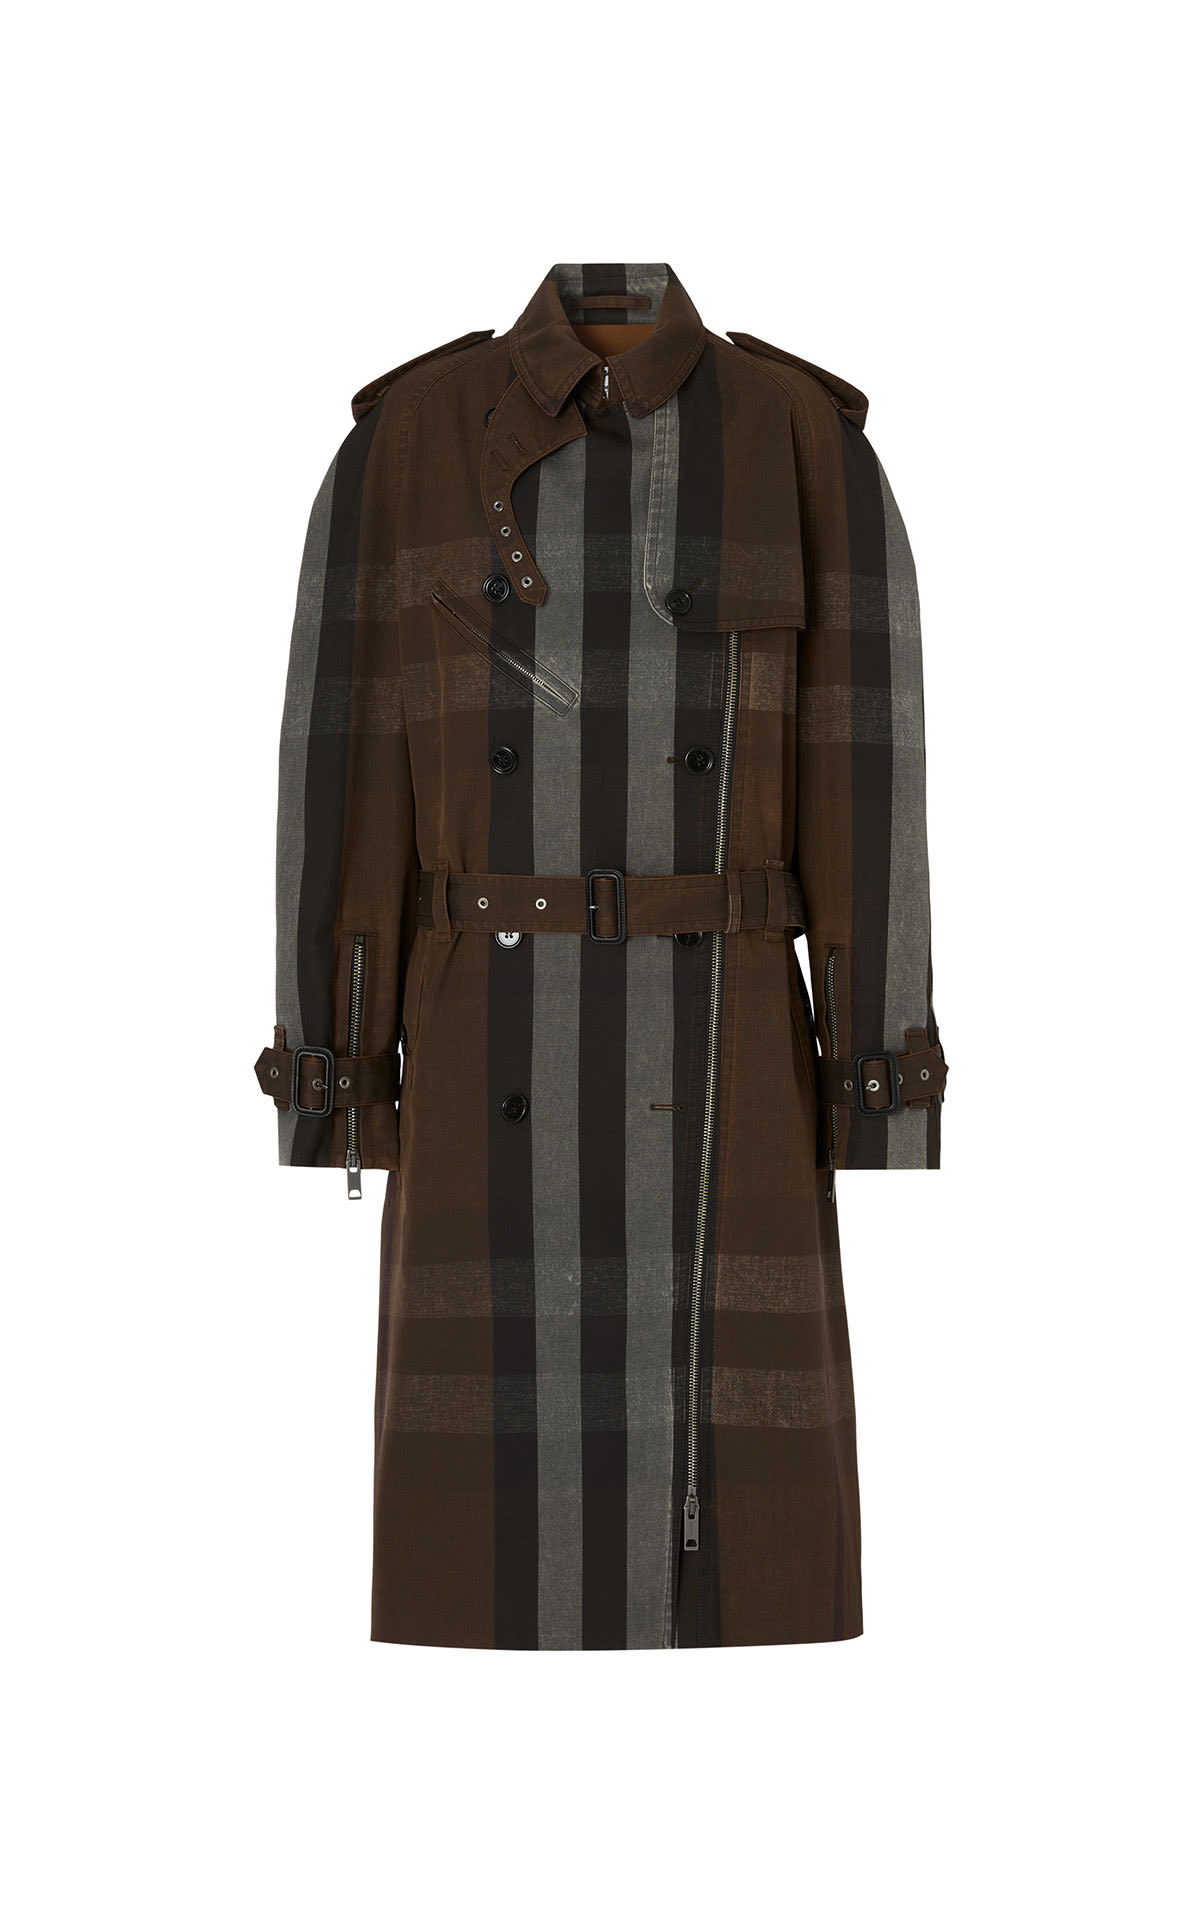 Burberry Women's coat from Bicester Village